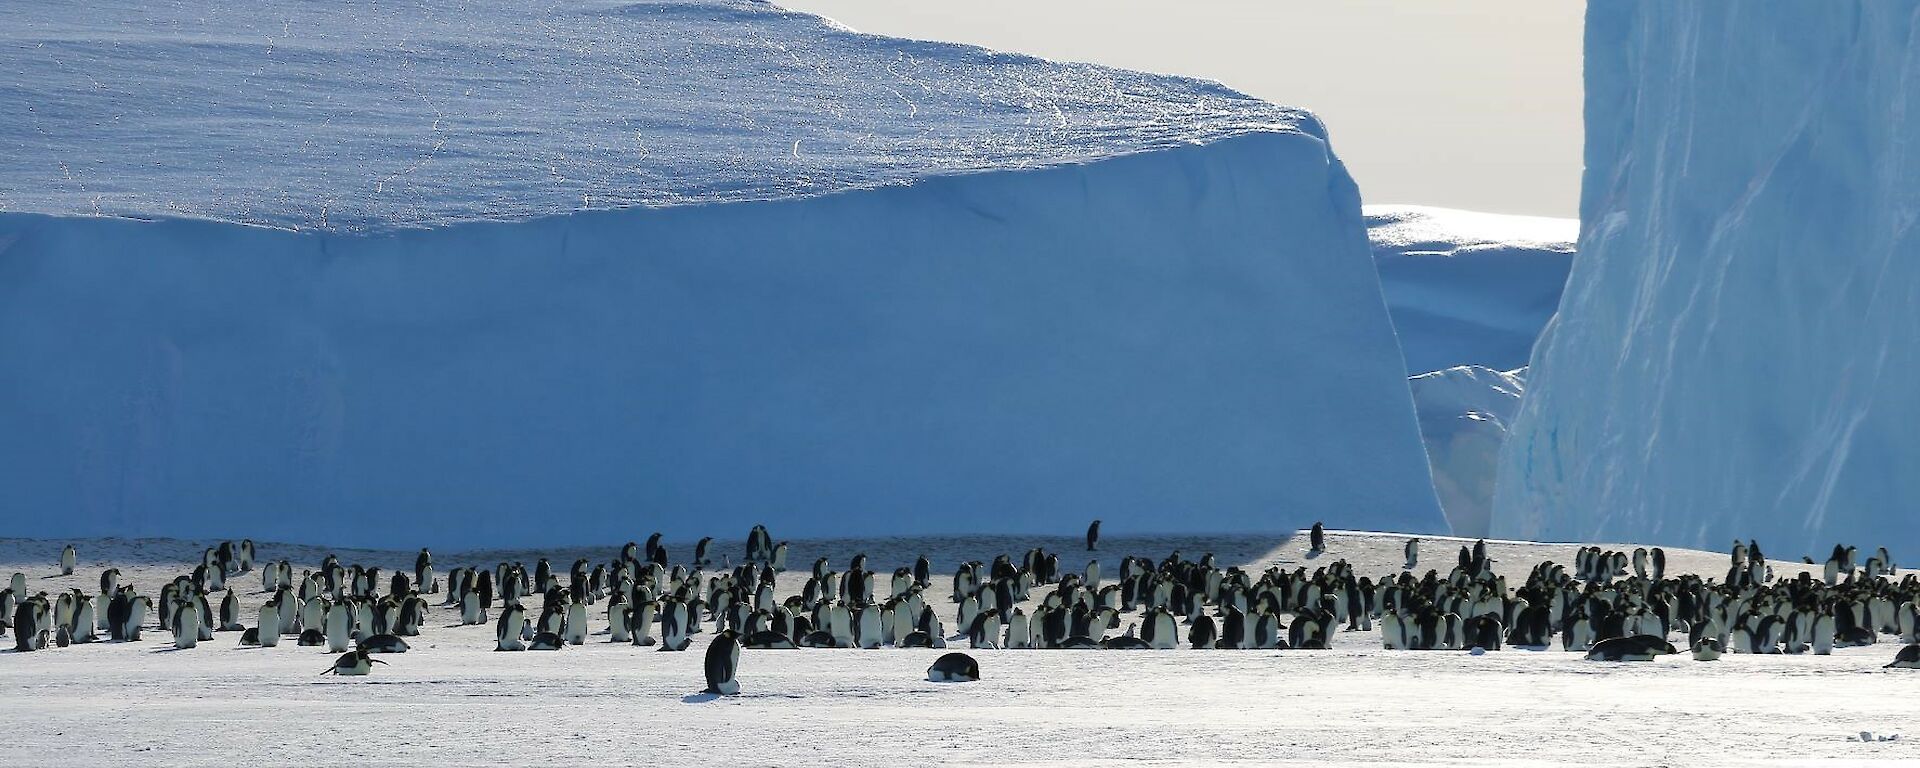 Emperor penguin colony with massive ice bergs in the background.